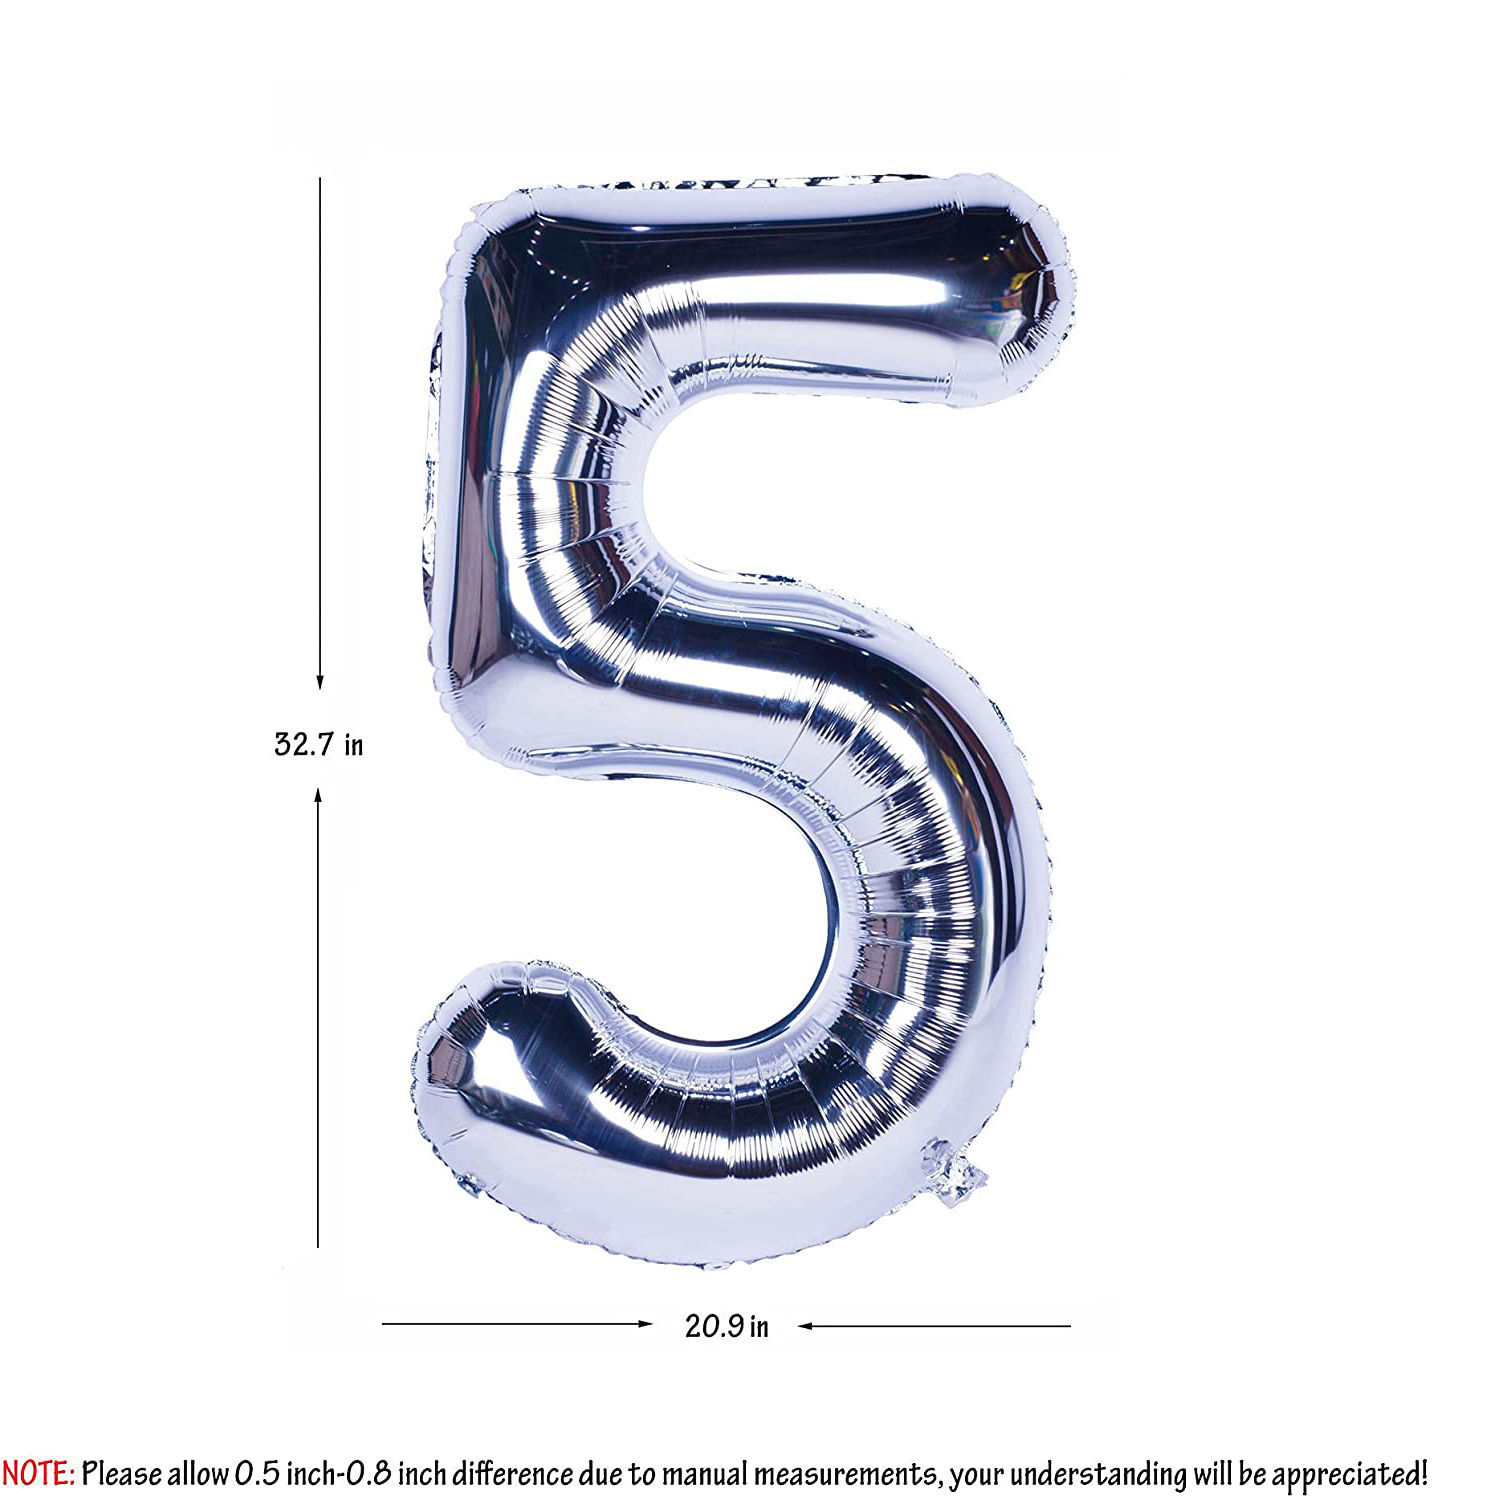 Picture of 34'' Foil Balloon Number 5 - Silver (helium-filled)